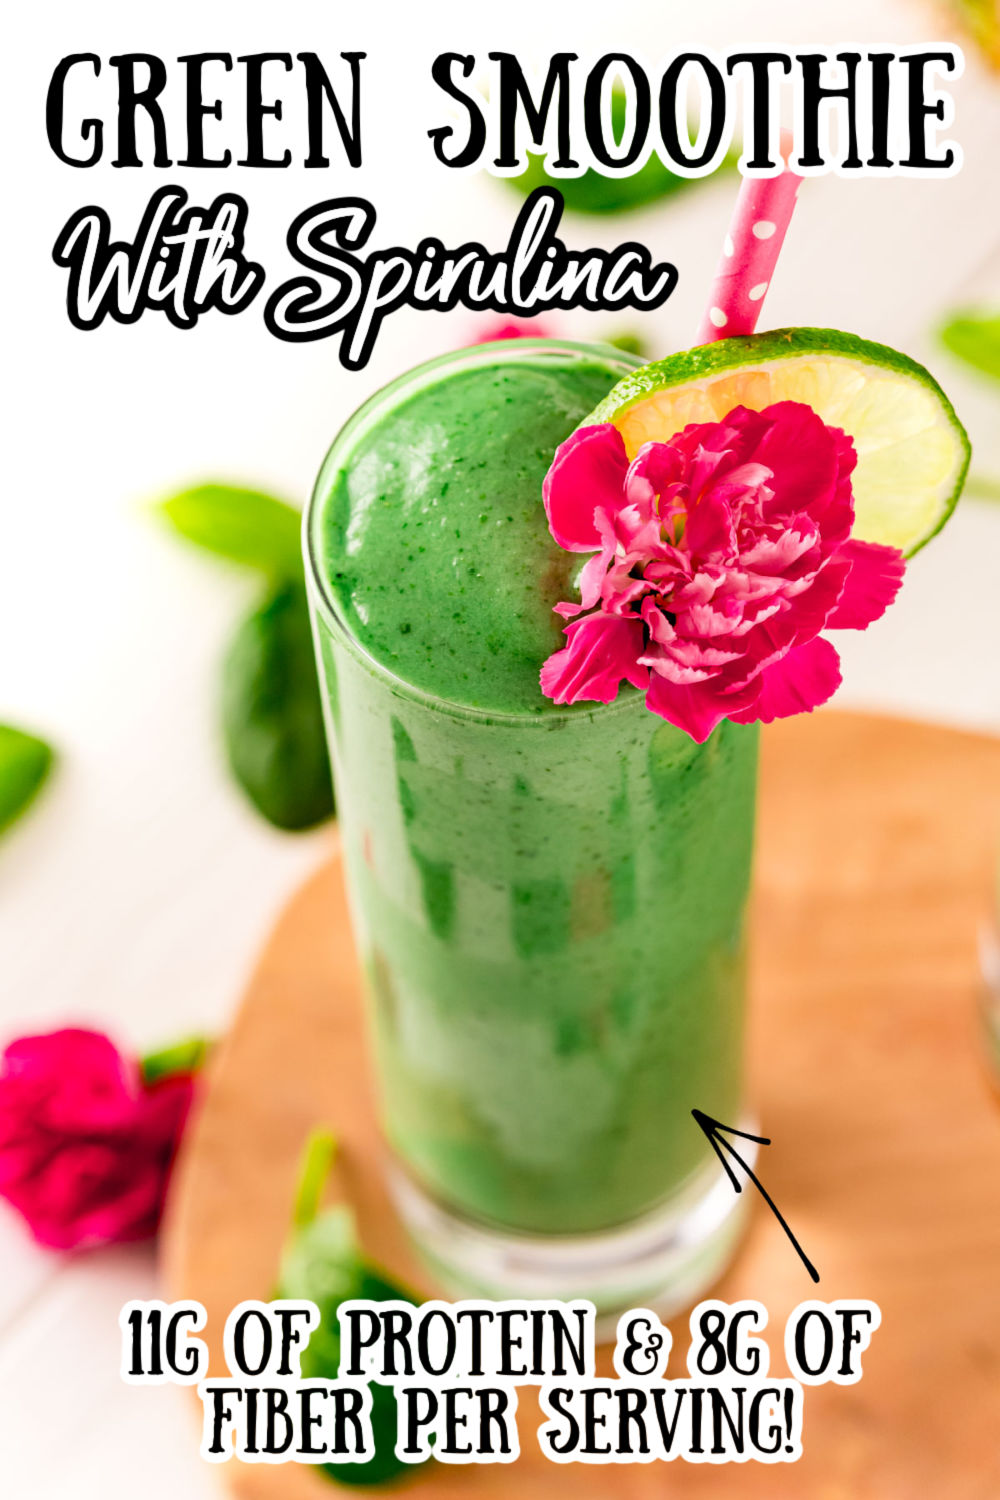 This Green Pineapple Spinach Spirulina Smoothie is overflowing with health benefits that are hidden behind a sweet fruity flavor you'll love! via @sugarandsoulco